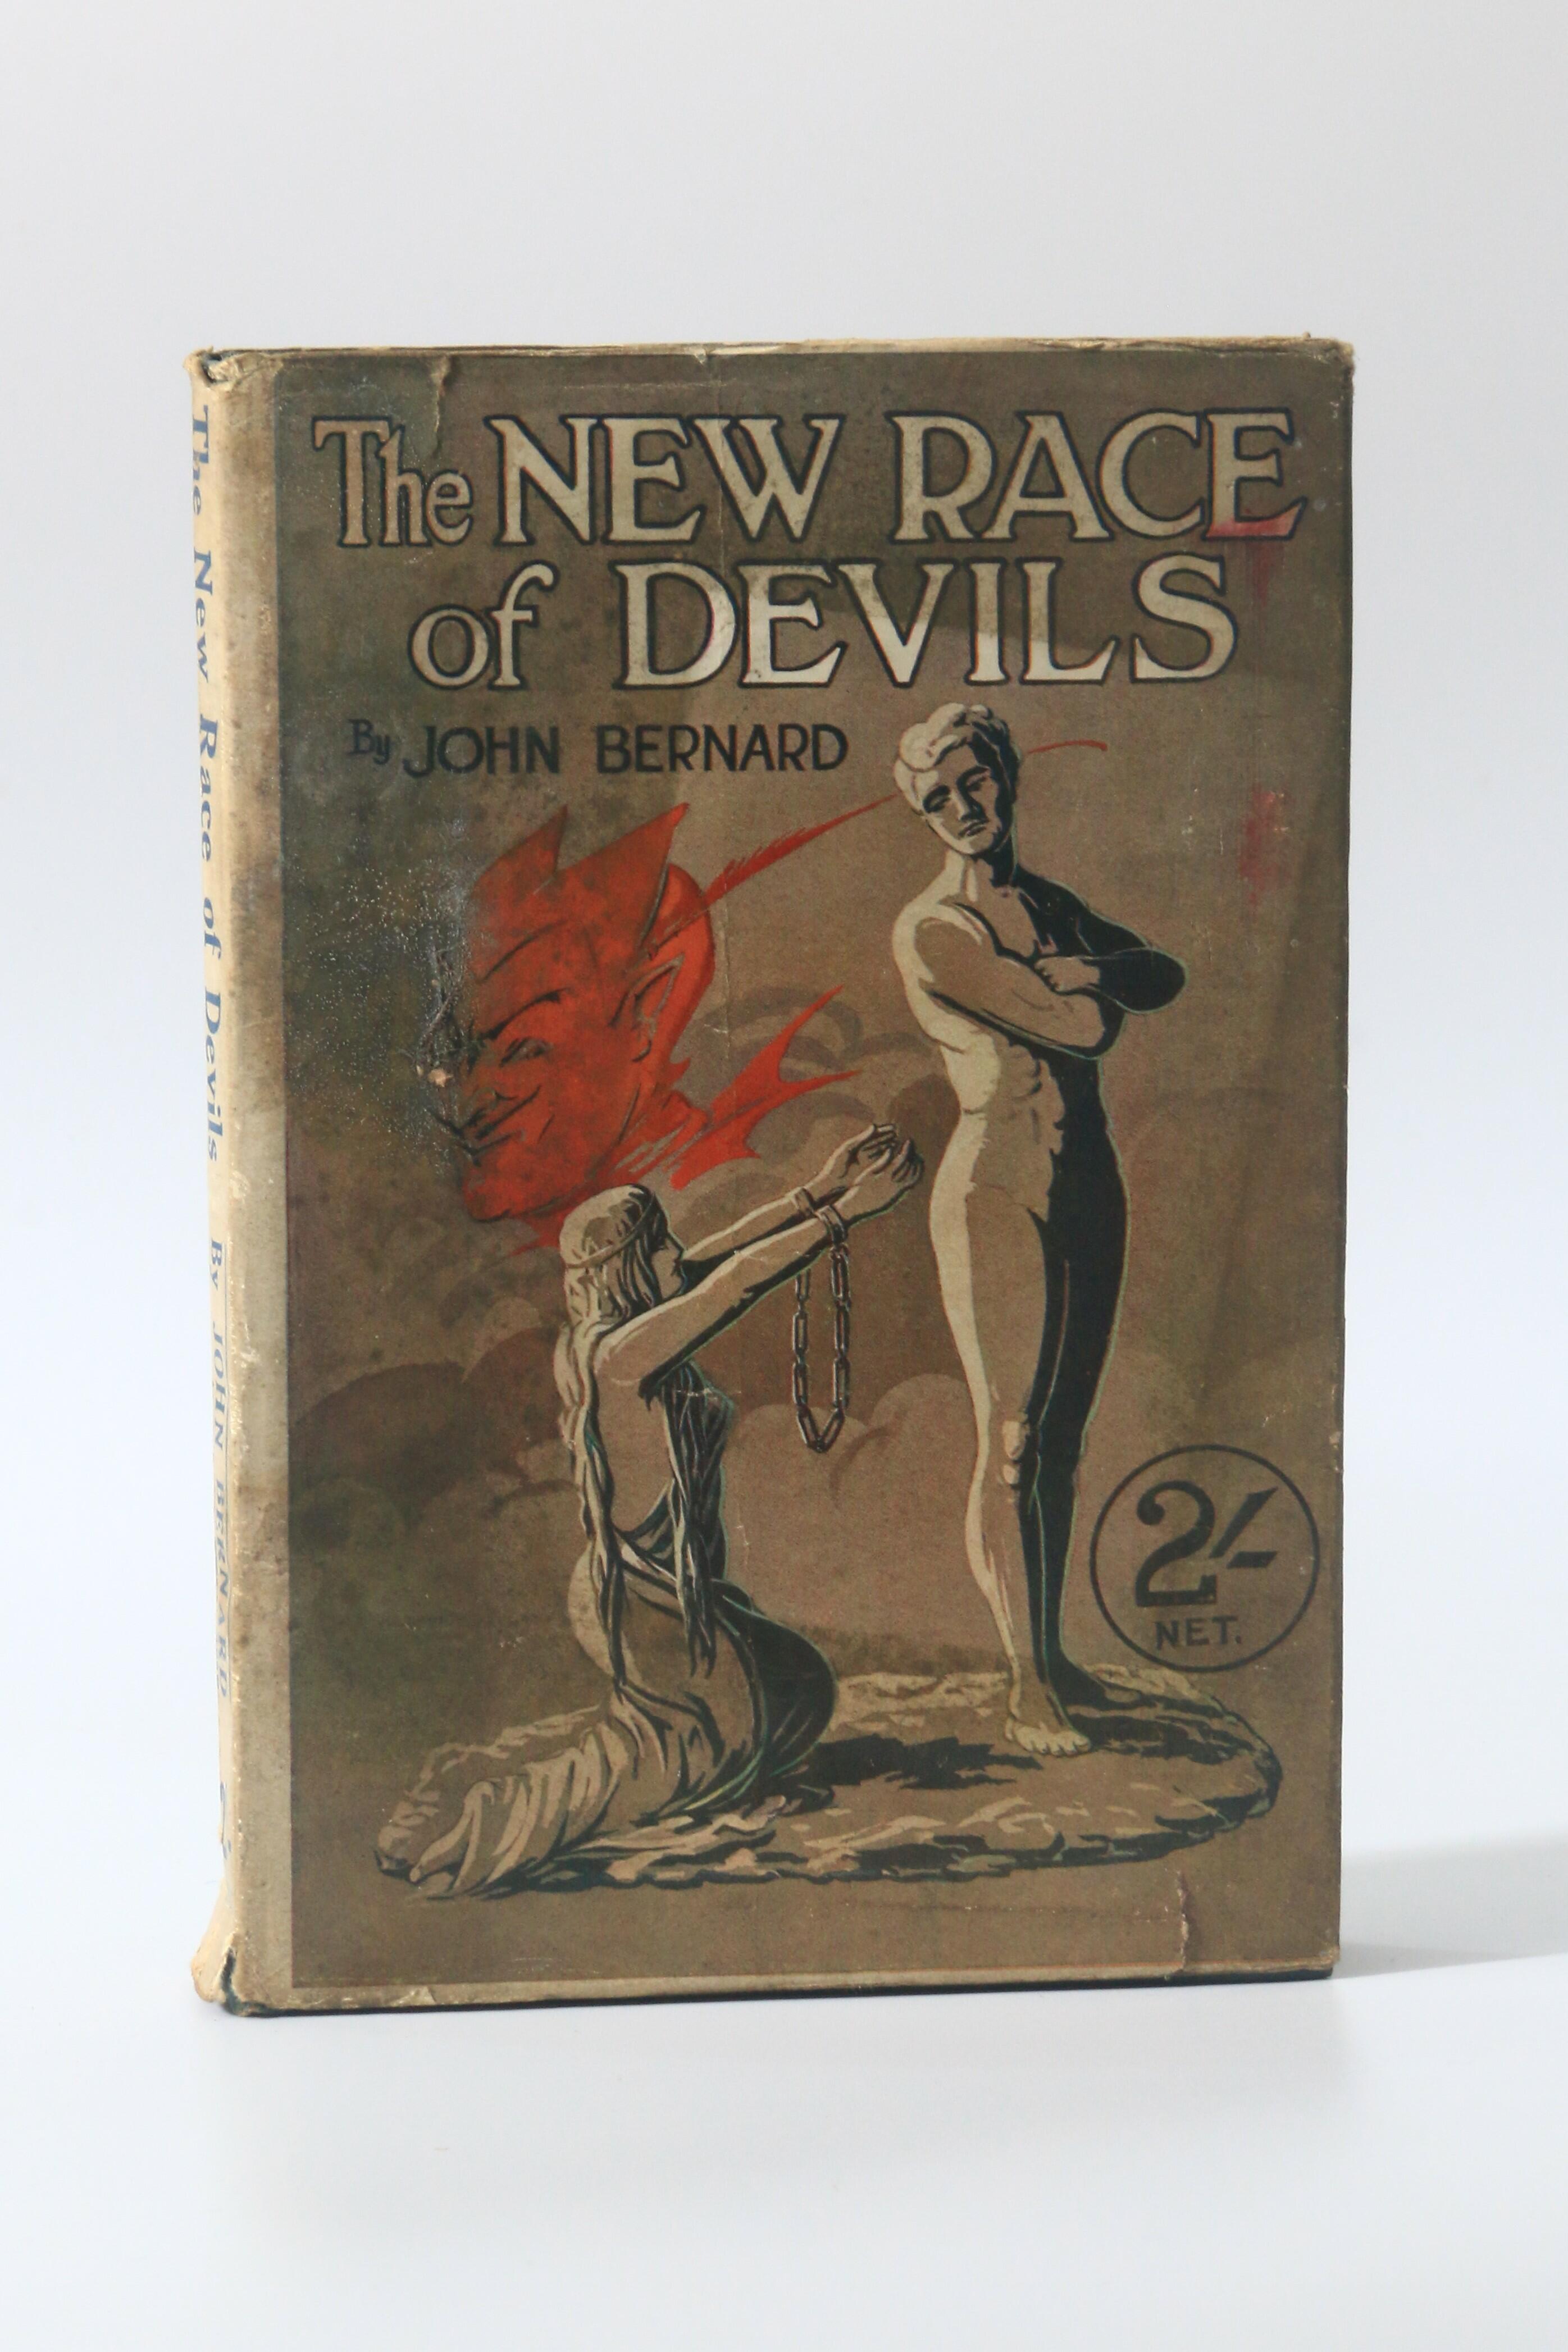 John Bernard - The New Race of Devils - Anglo-Eastern Publishing Company, nd [1921], First Edition.